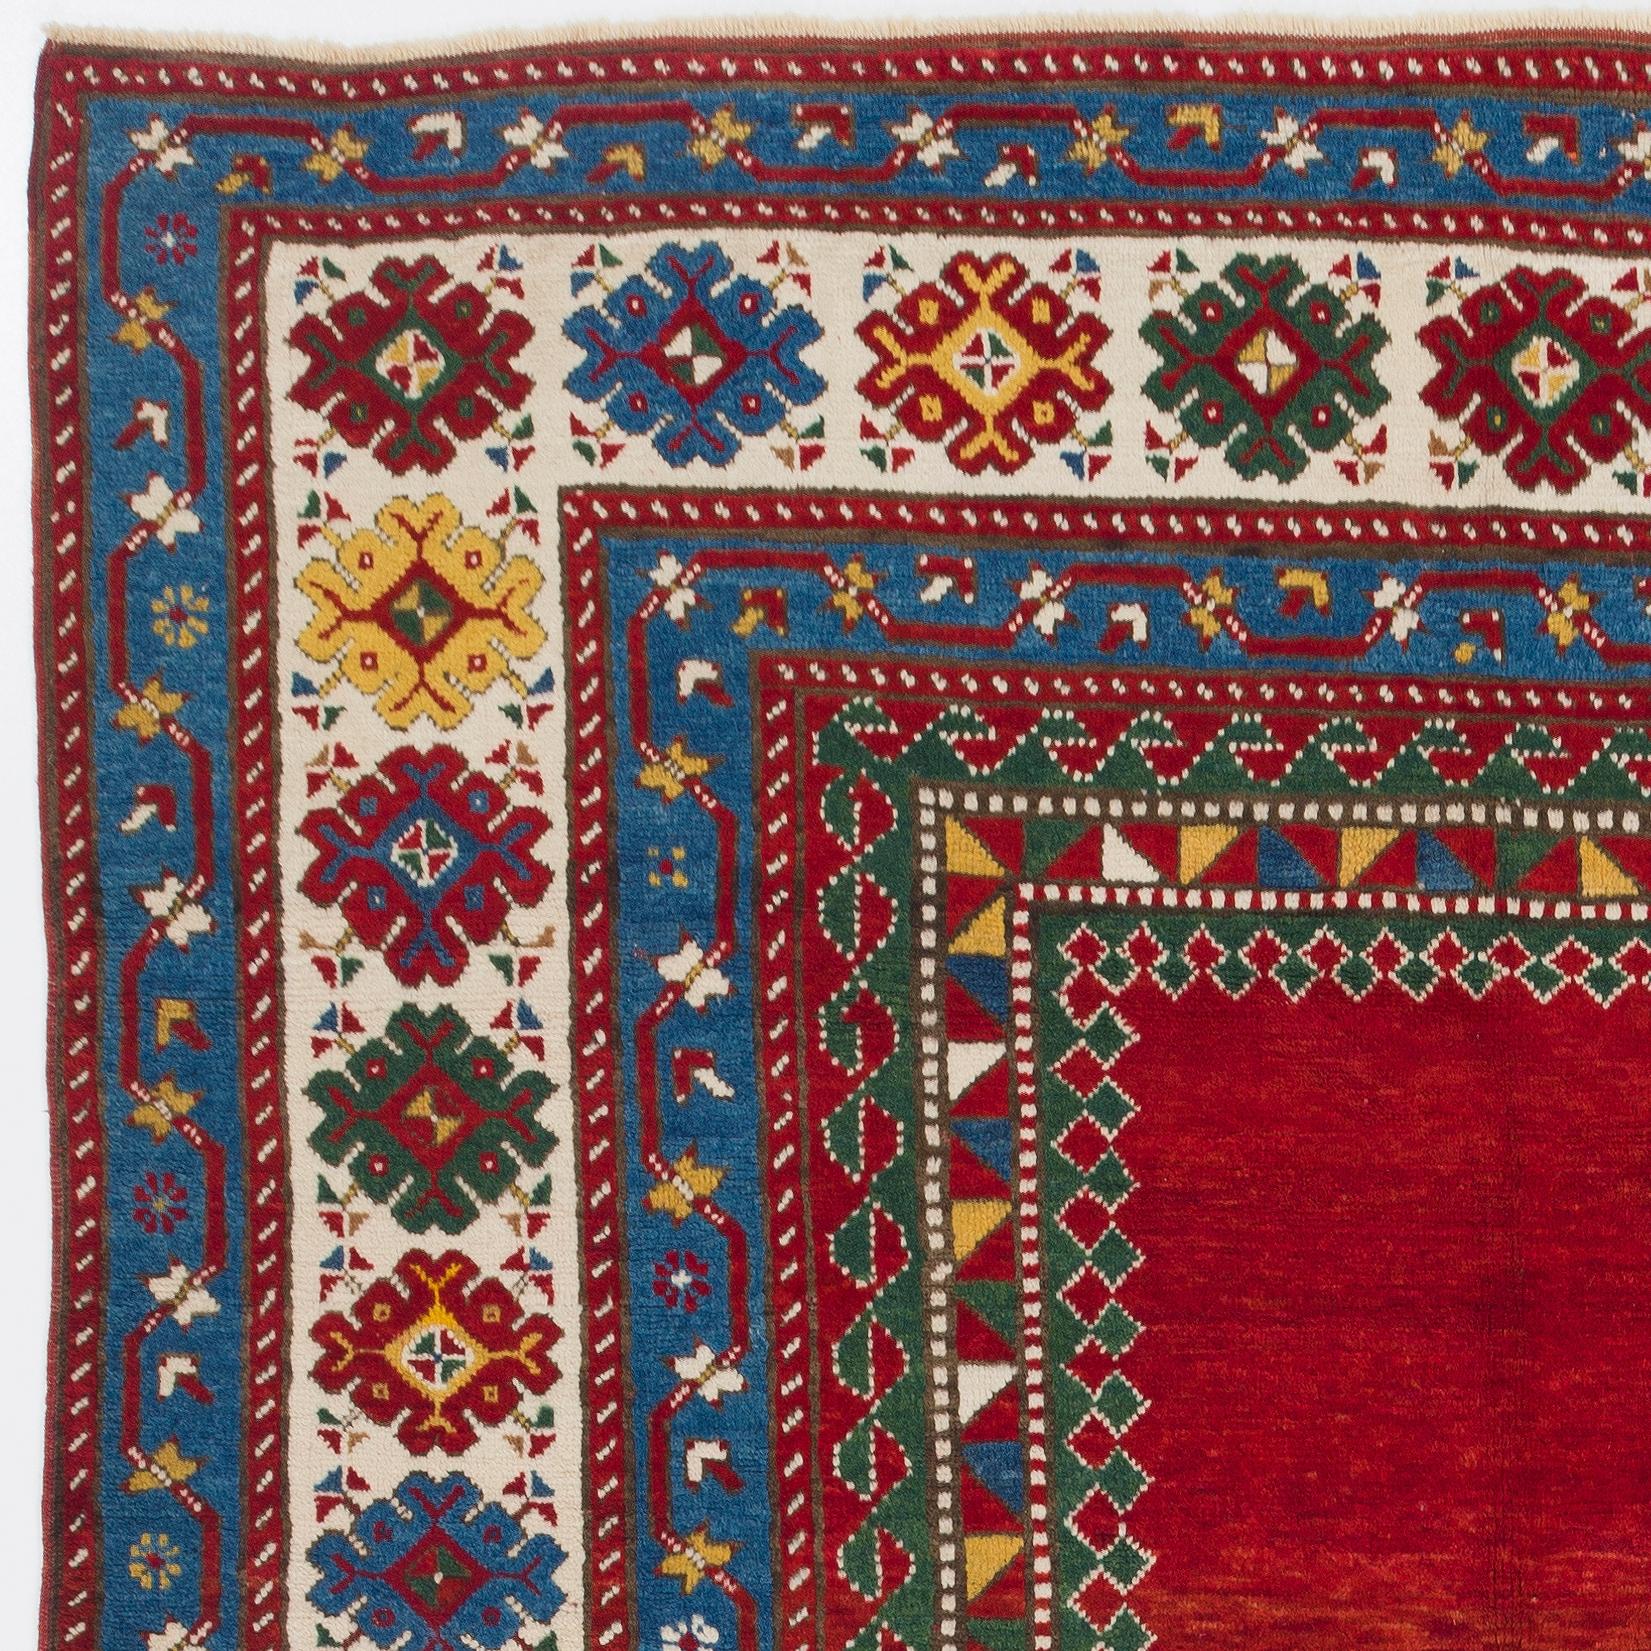 Antique Caucasian Kazak rug with solid red ground. Size: 5.9 x 9.3 ft
All wool, natural dyes, very good condition.

Finely hand-knotted with even medium wool pile on wool foundation. Very good condition. Sturdy and as clean as a brand new rug (deep